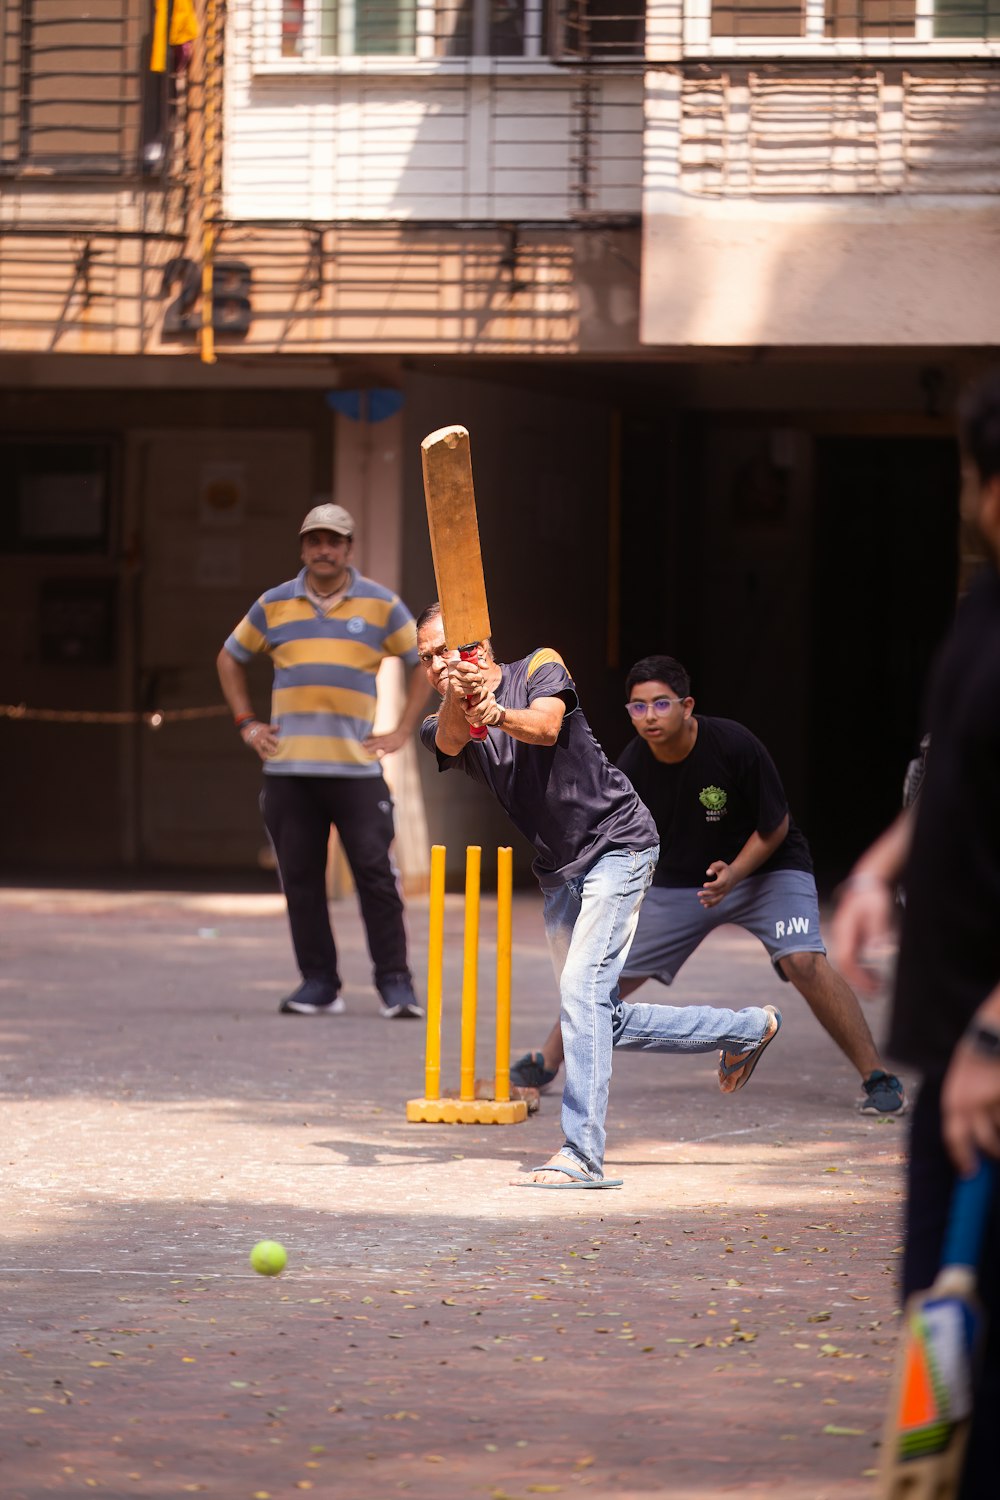 a group of men playing a game of cricket